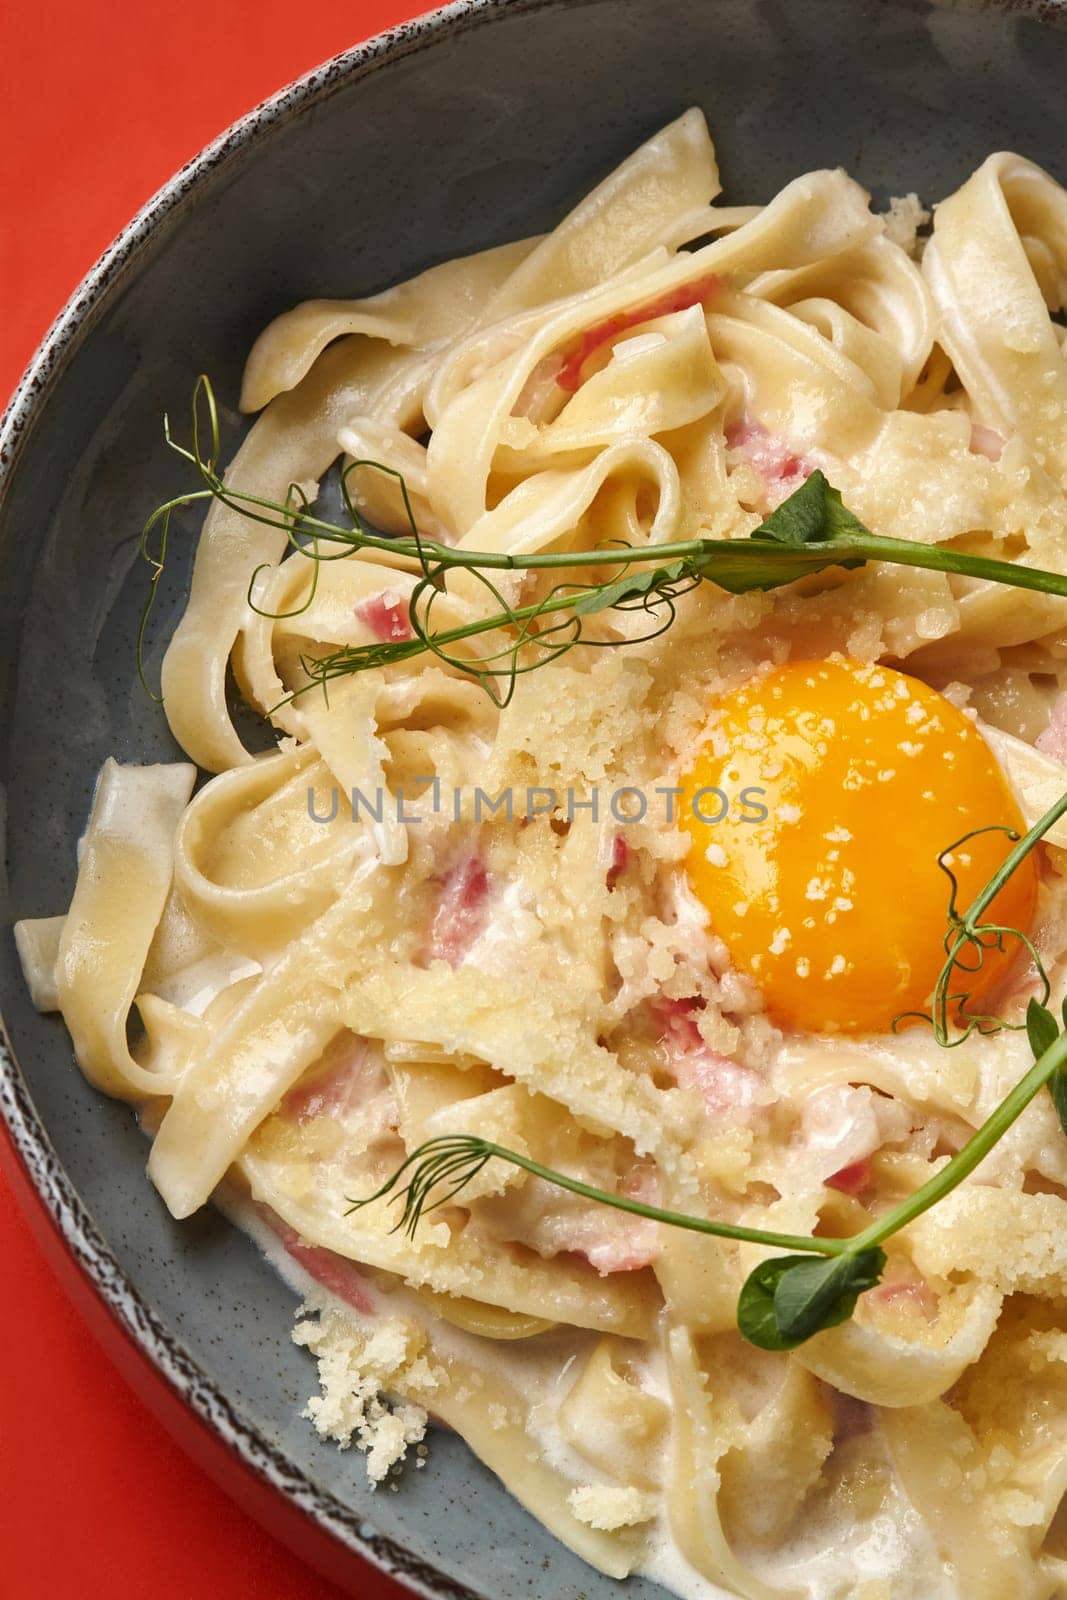 Bowl of traditional Italian pasta carbonara with cured pork pieces, topped with sunny-side up egg, sprinkled with parmesan, and garnished with delicate greens on red background